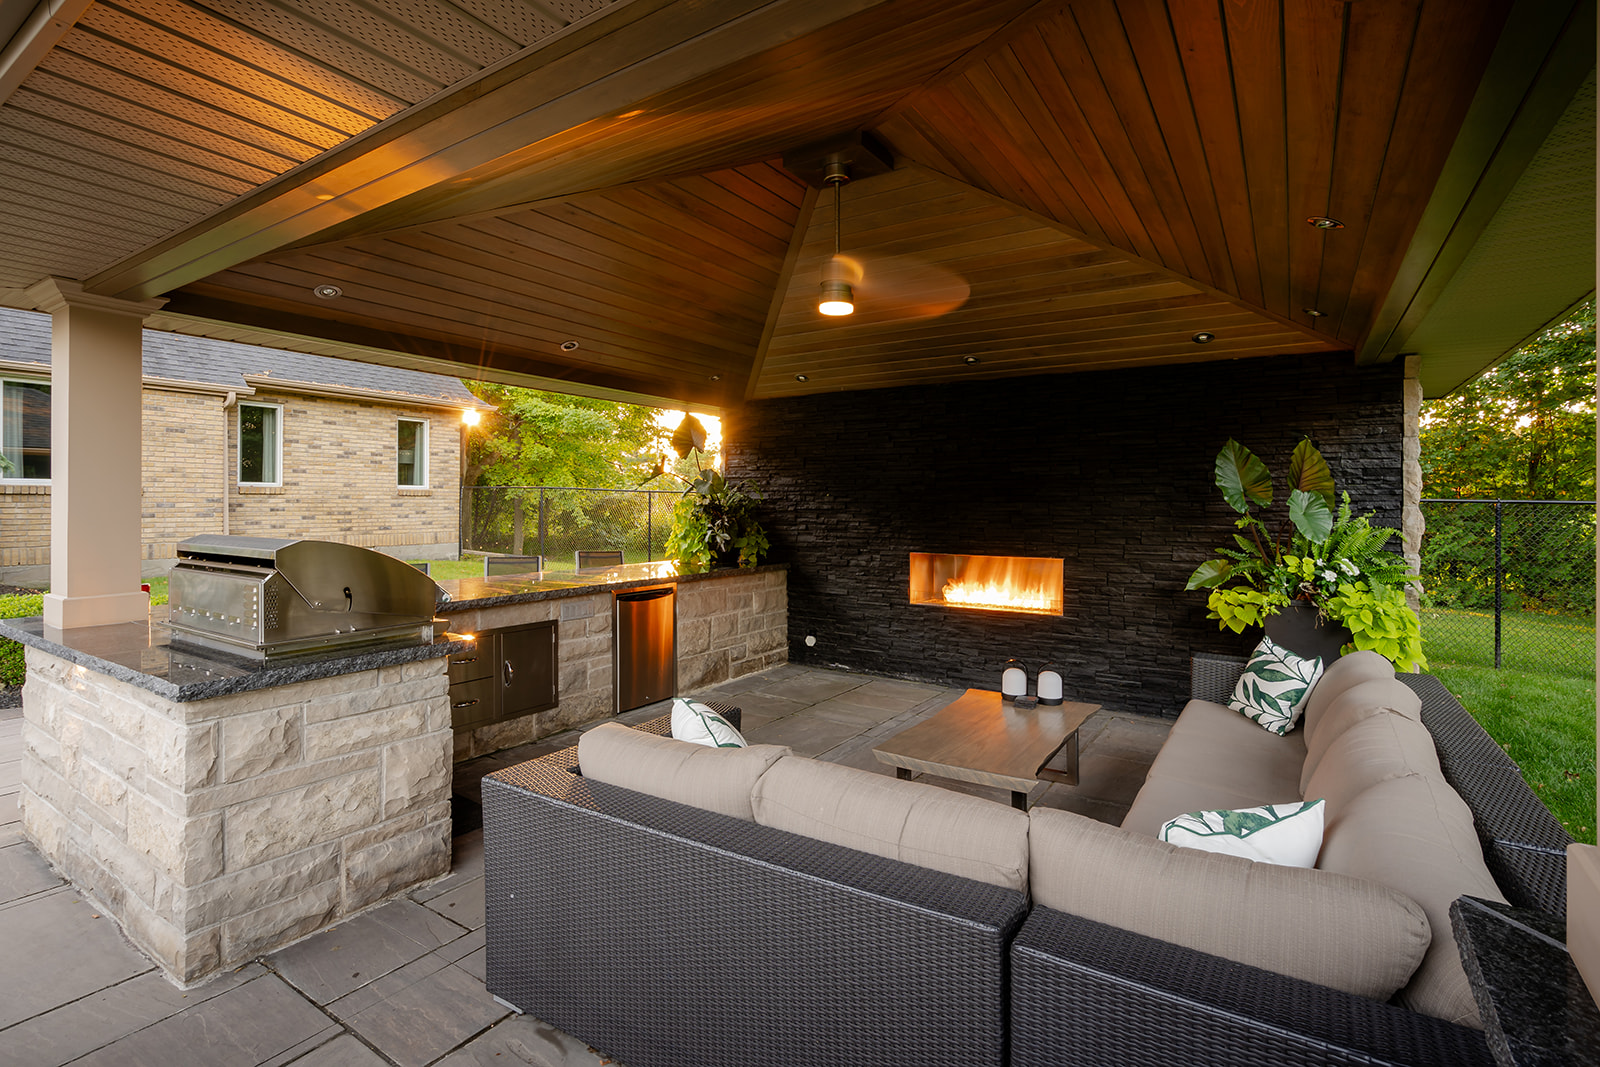 An outdoor patio set with the fireplace on in the wall of the gazebo.